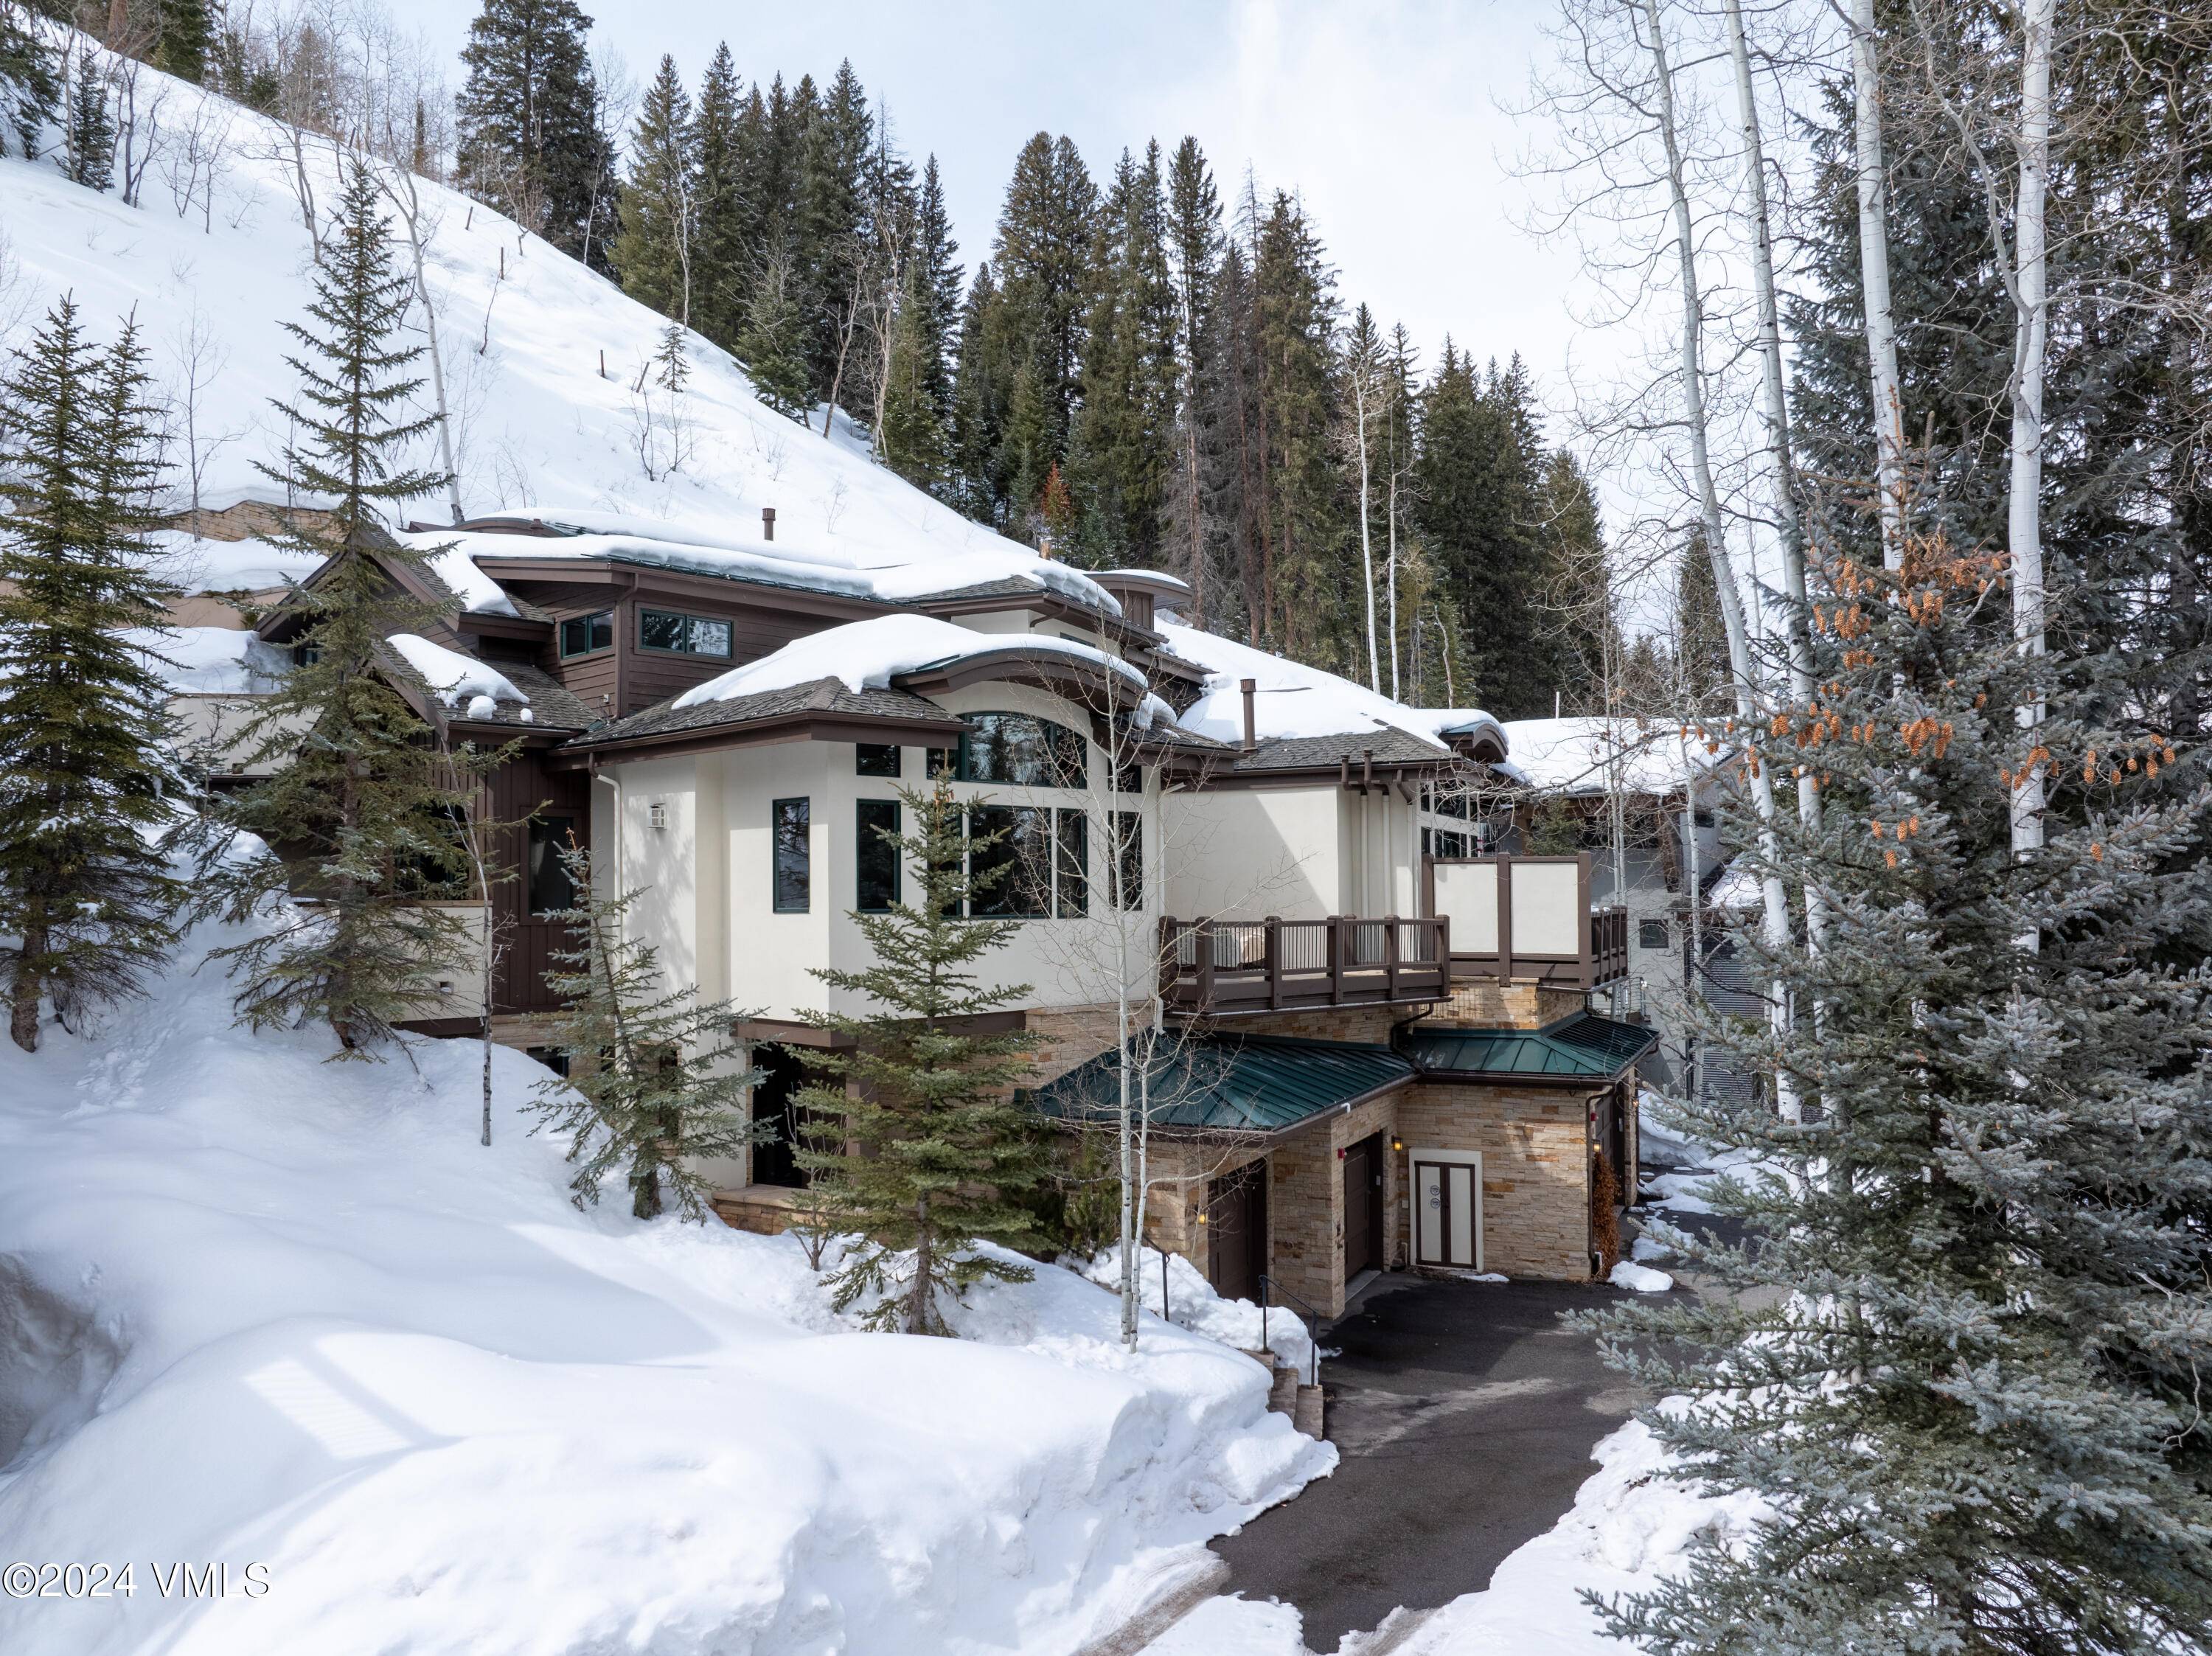 Extensive interior updates transform this unique duplex home into a fresh, bright, sophisticated mountain sanctuary nestled in the charming rustic neighborhood of East Vail.